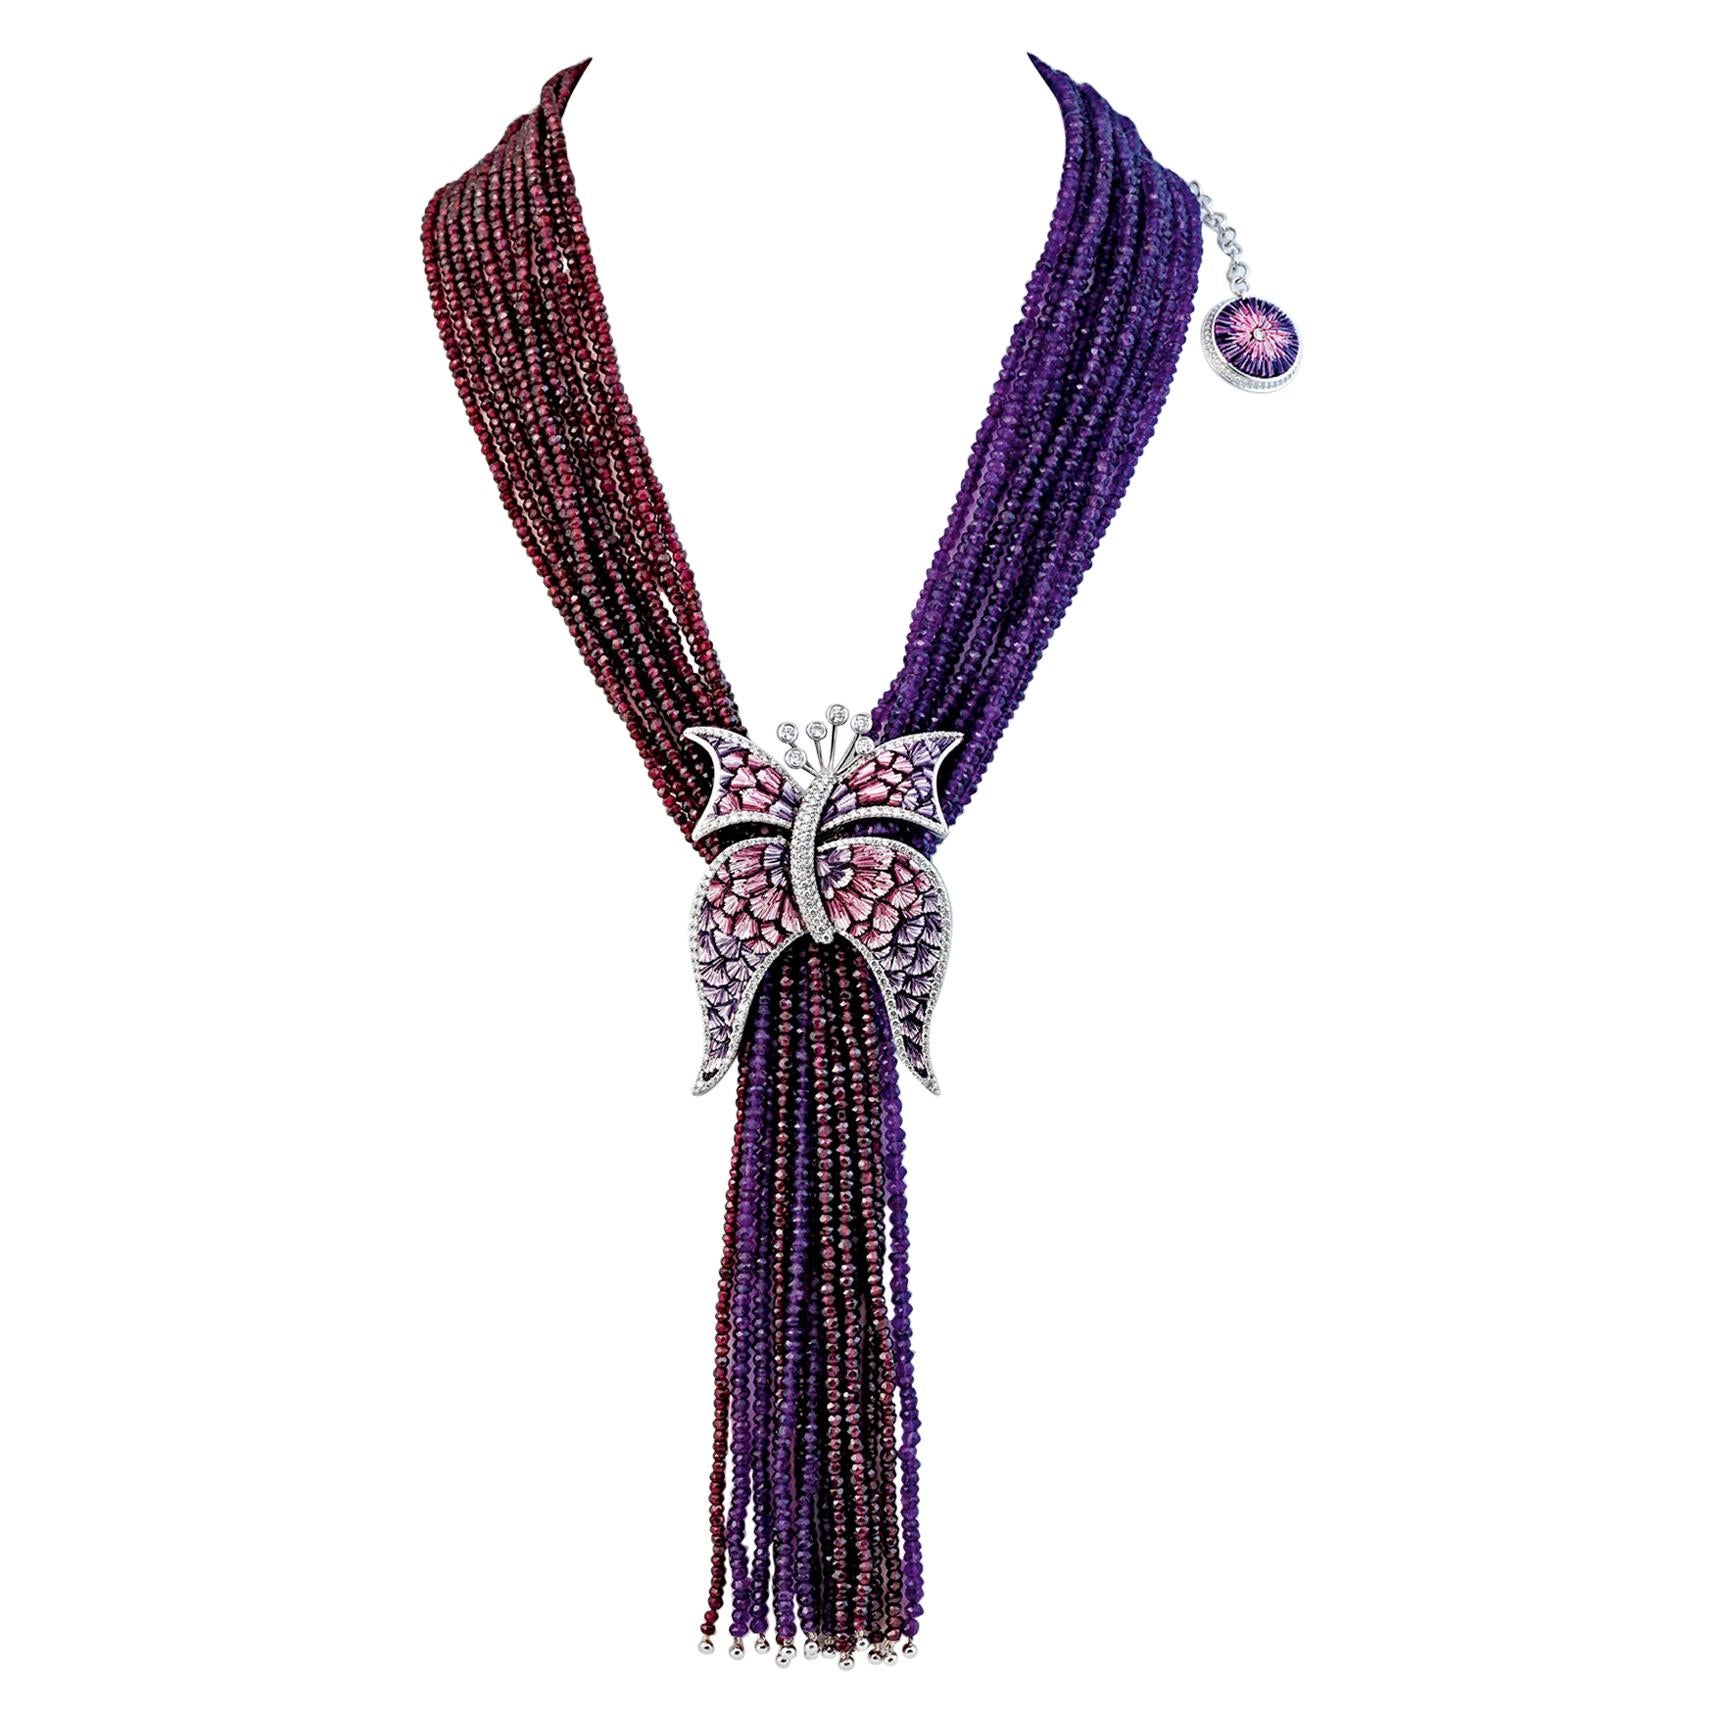 Necklace White Gold White Diamonds Amethyst Garnet Hand Decorated Micro Mosaic For Sale